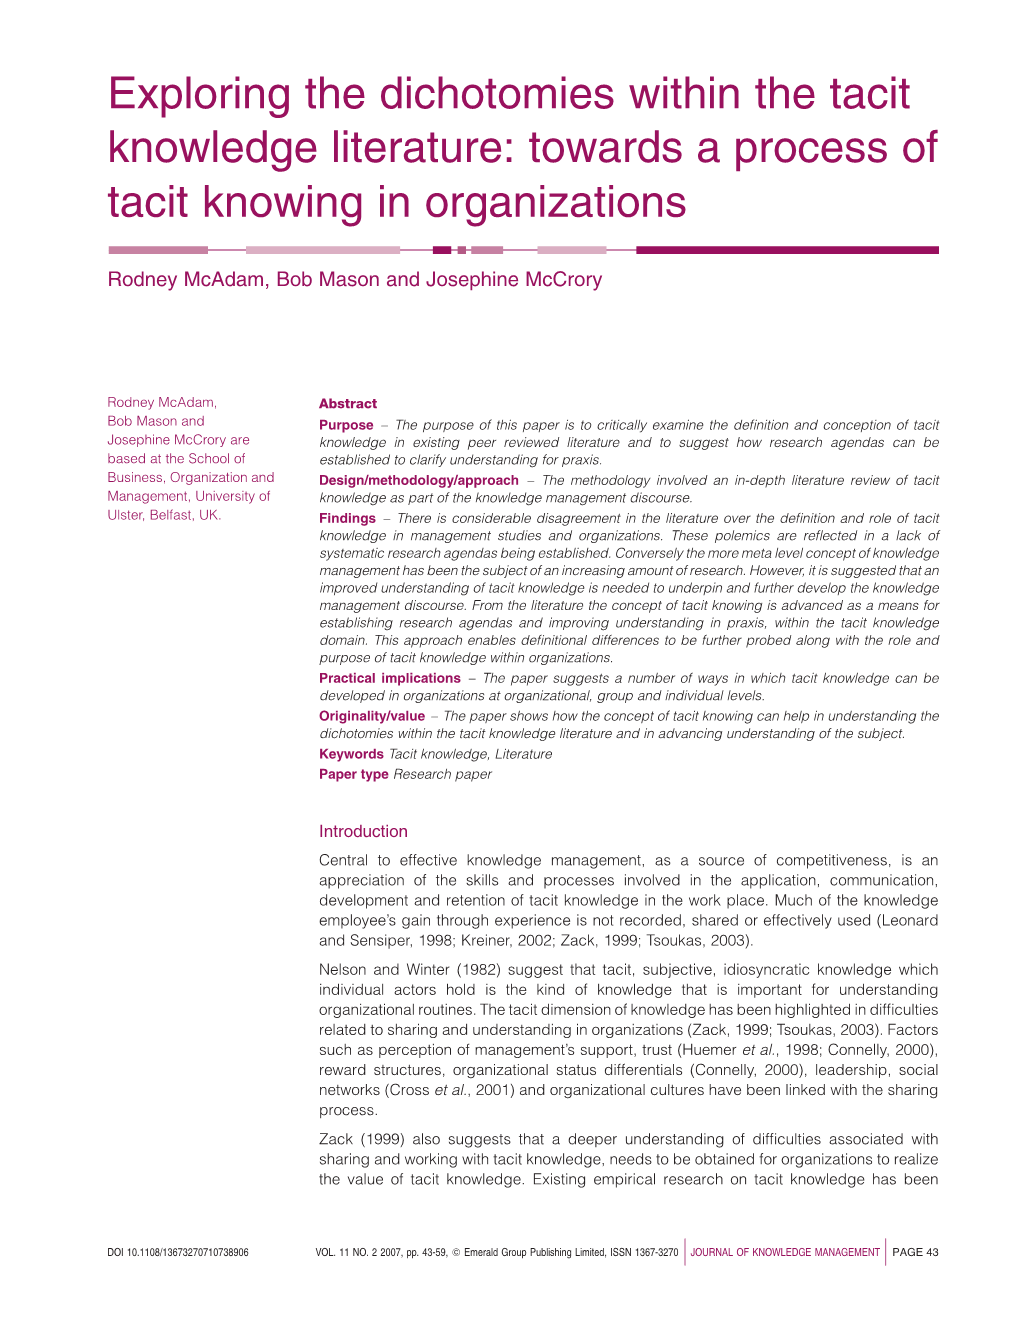 Exploring the Dichotomies Within the Tacit Knowledge Literature: Towards a Process of Tacit Knowing in Organizations